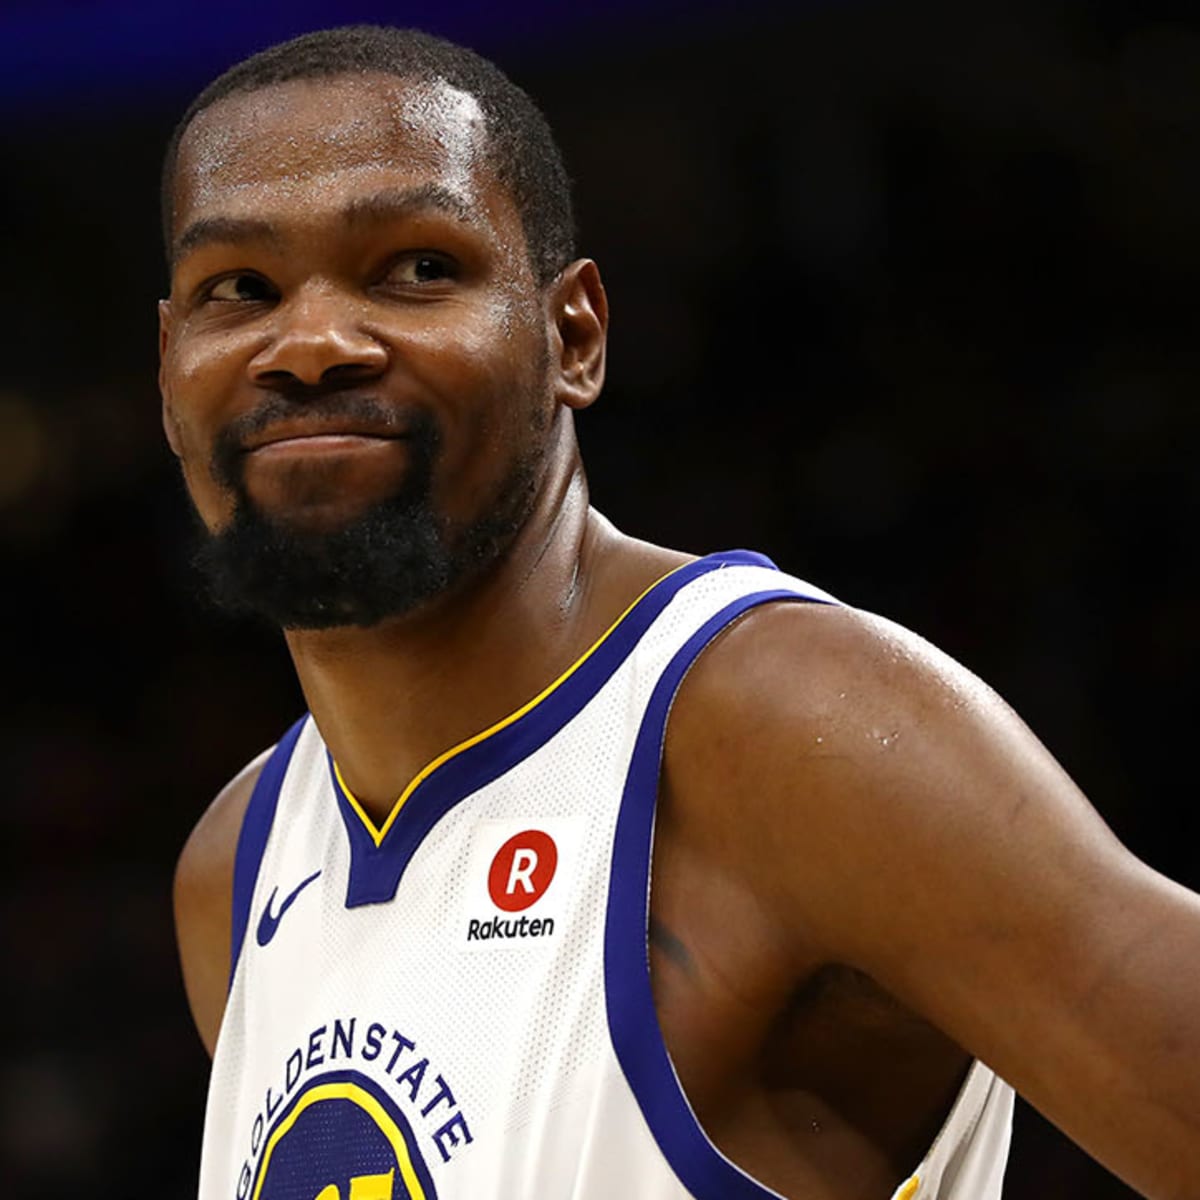 Kevin Durant wins back-to-back NBA Finals MVPs – The Durango Herald